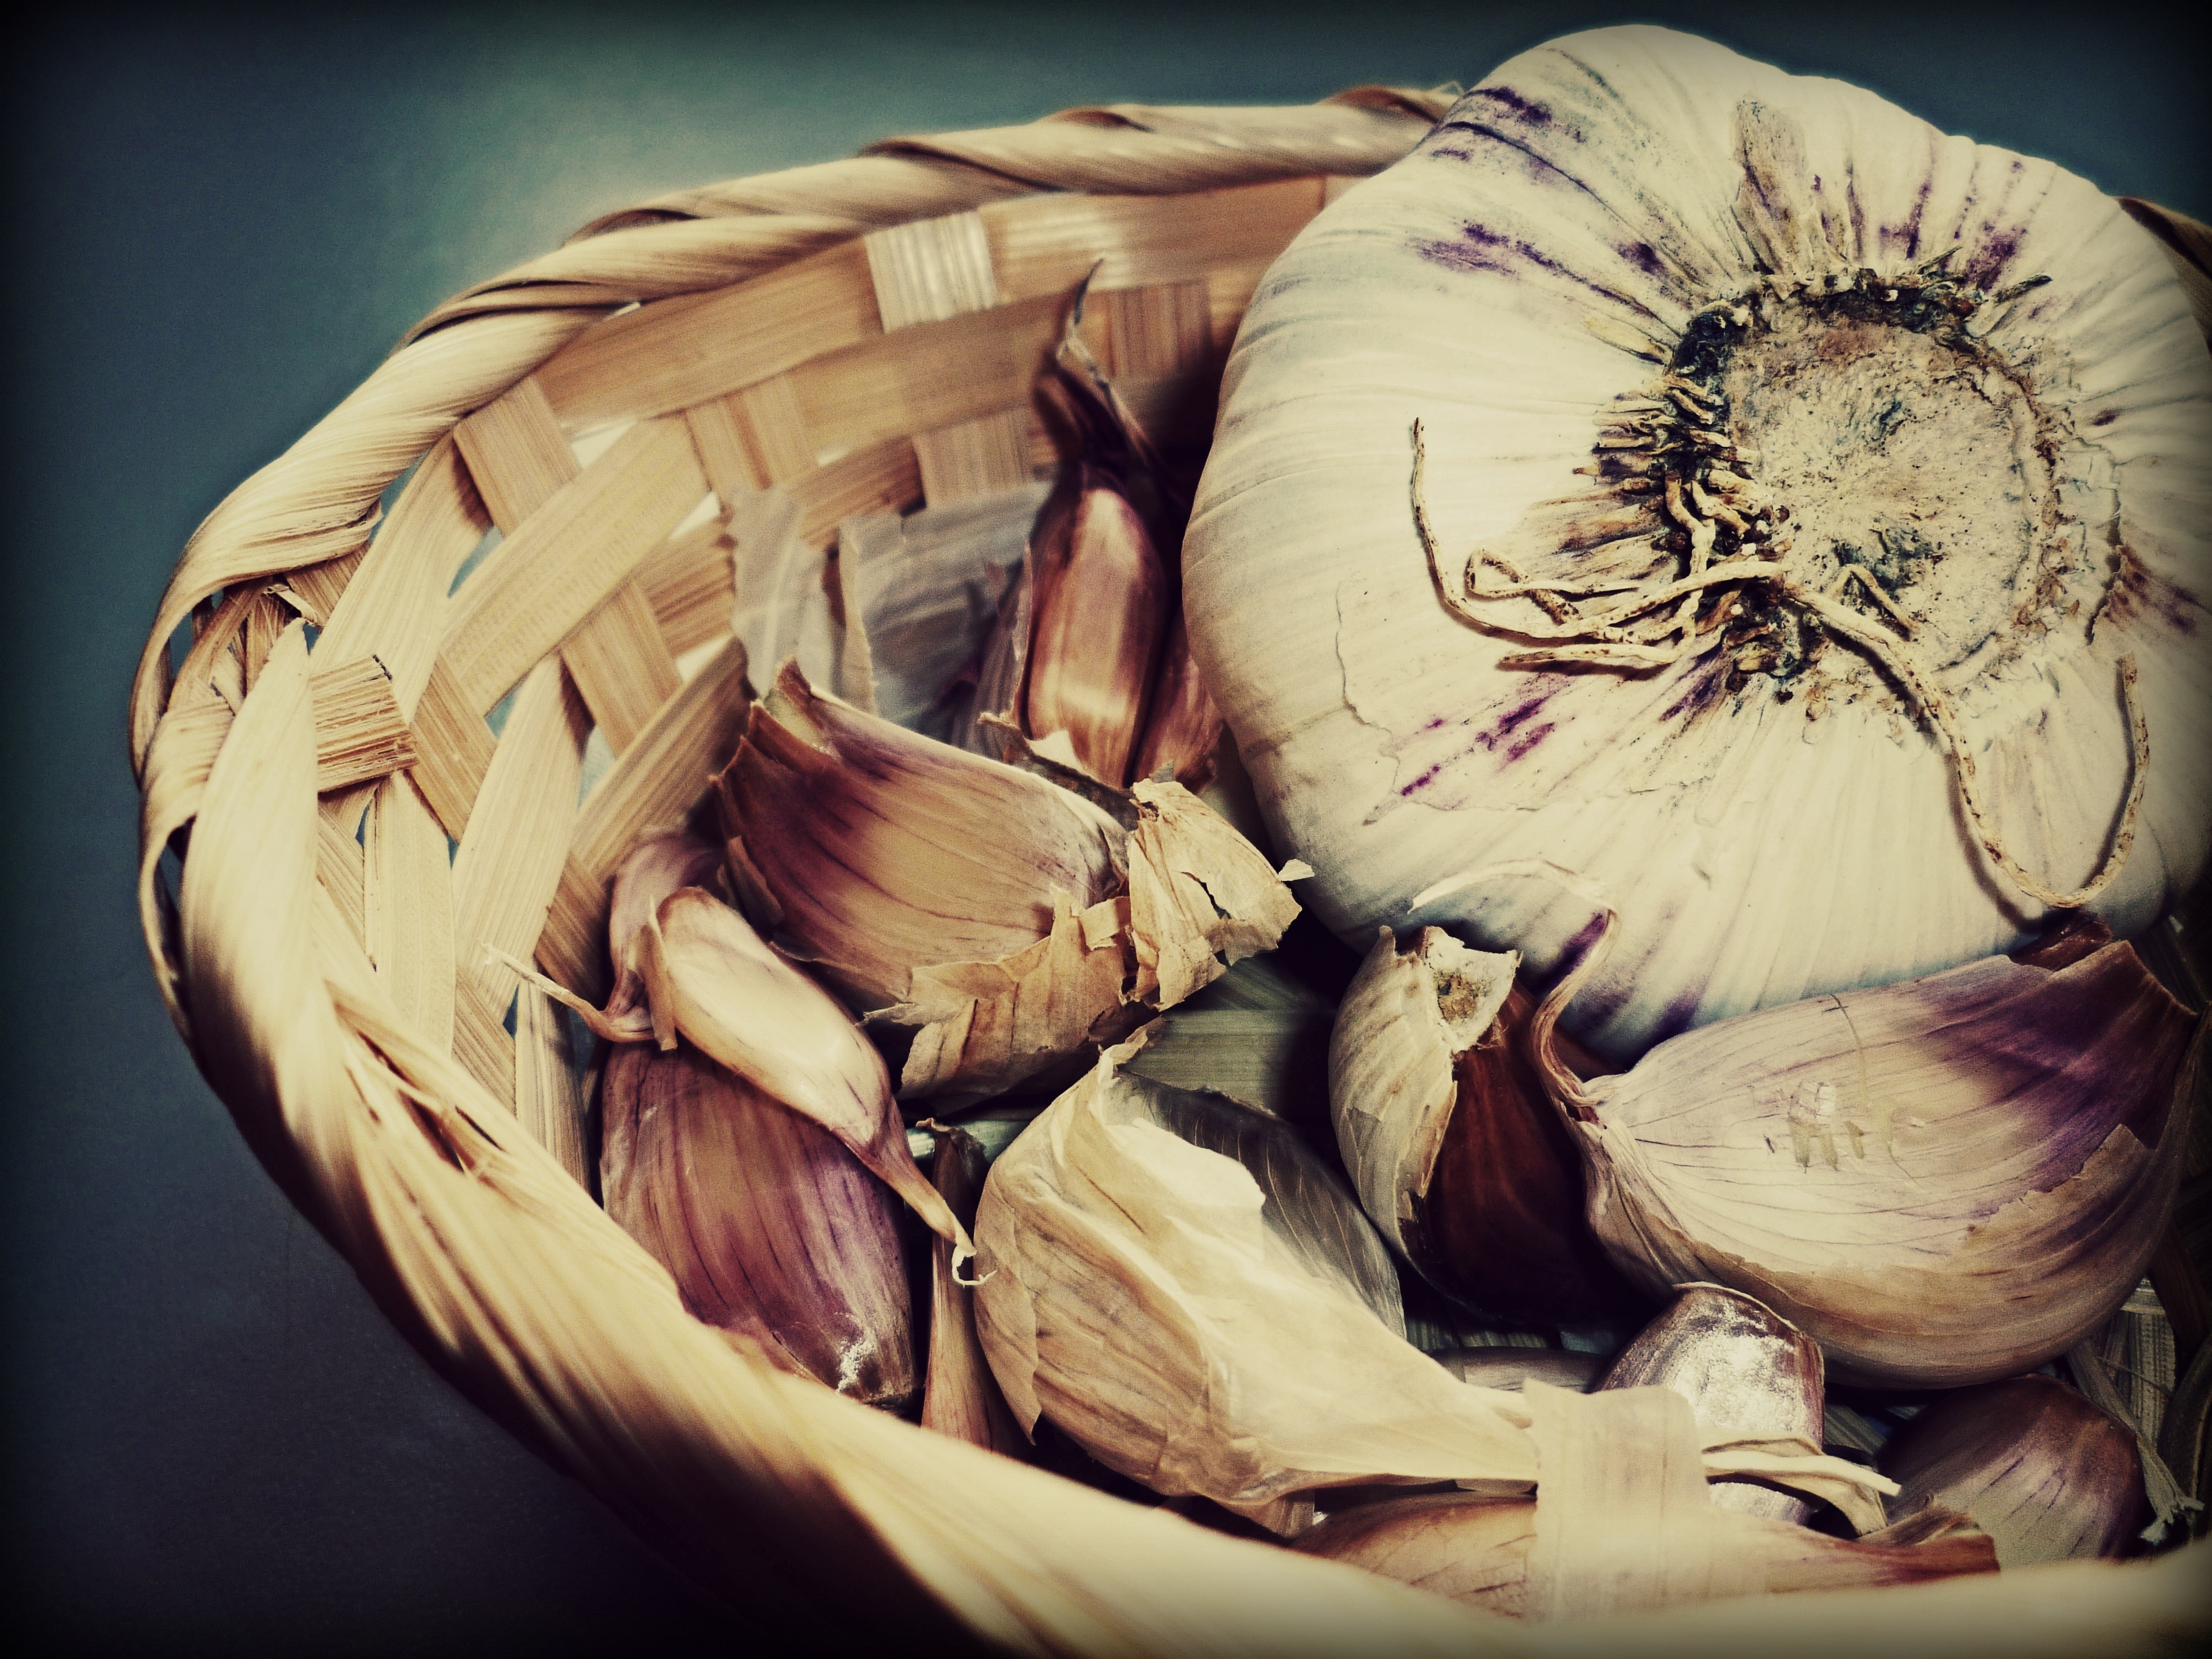 garlic and onions in brown woven basket